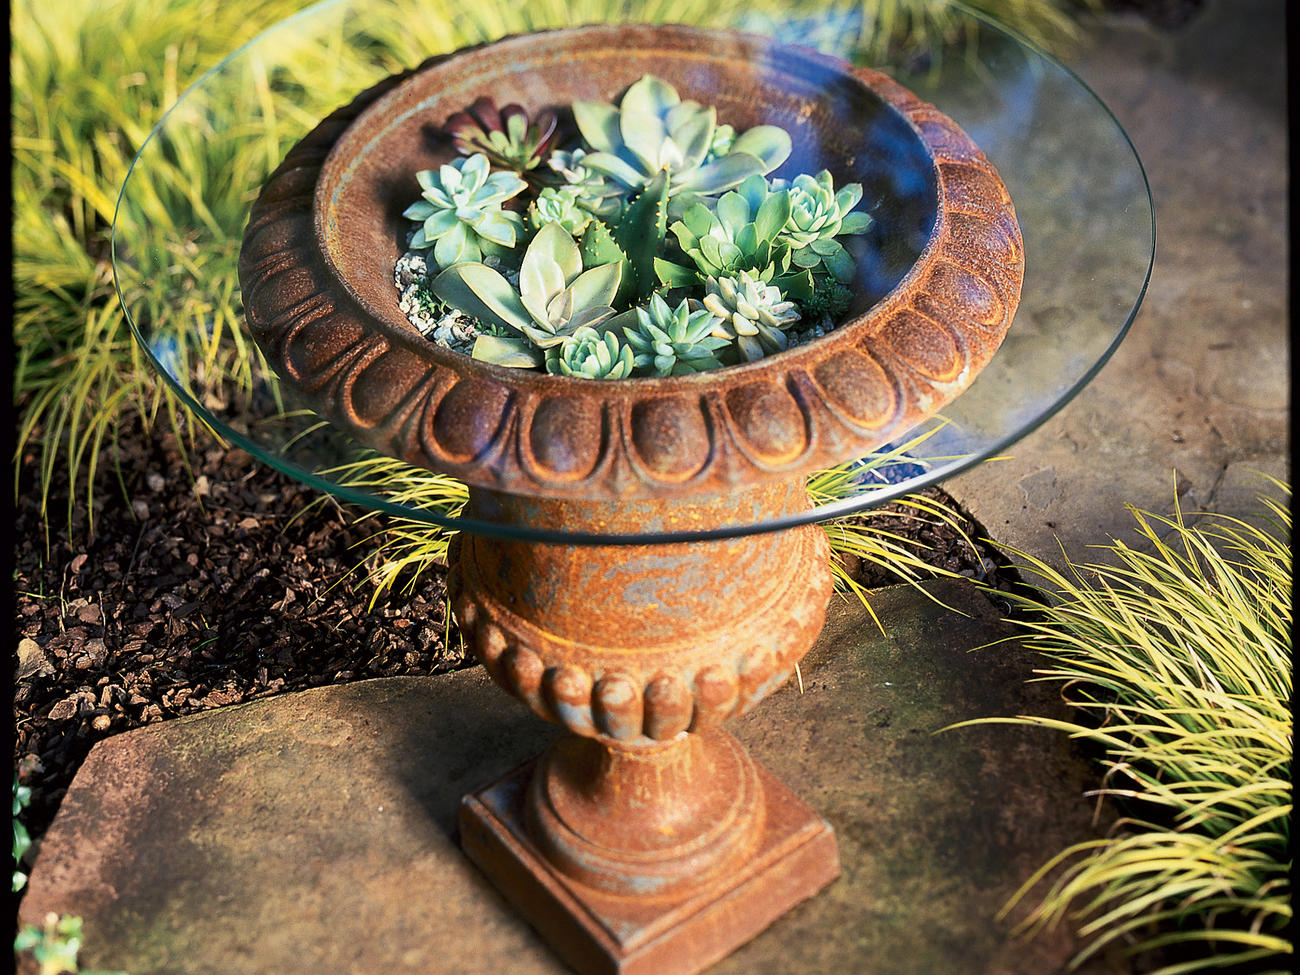 Urn as patio table – or container for a living bouquet